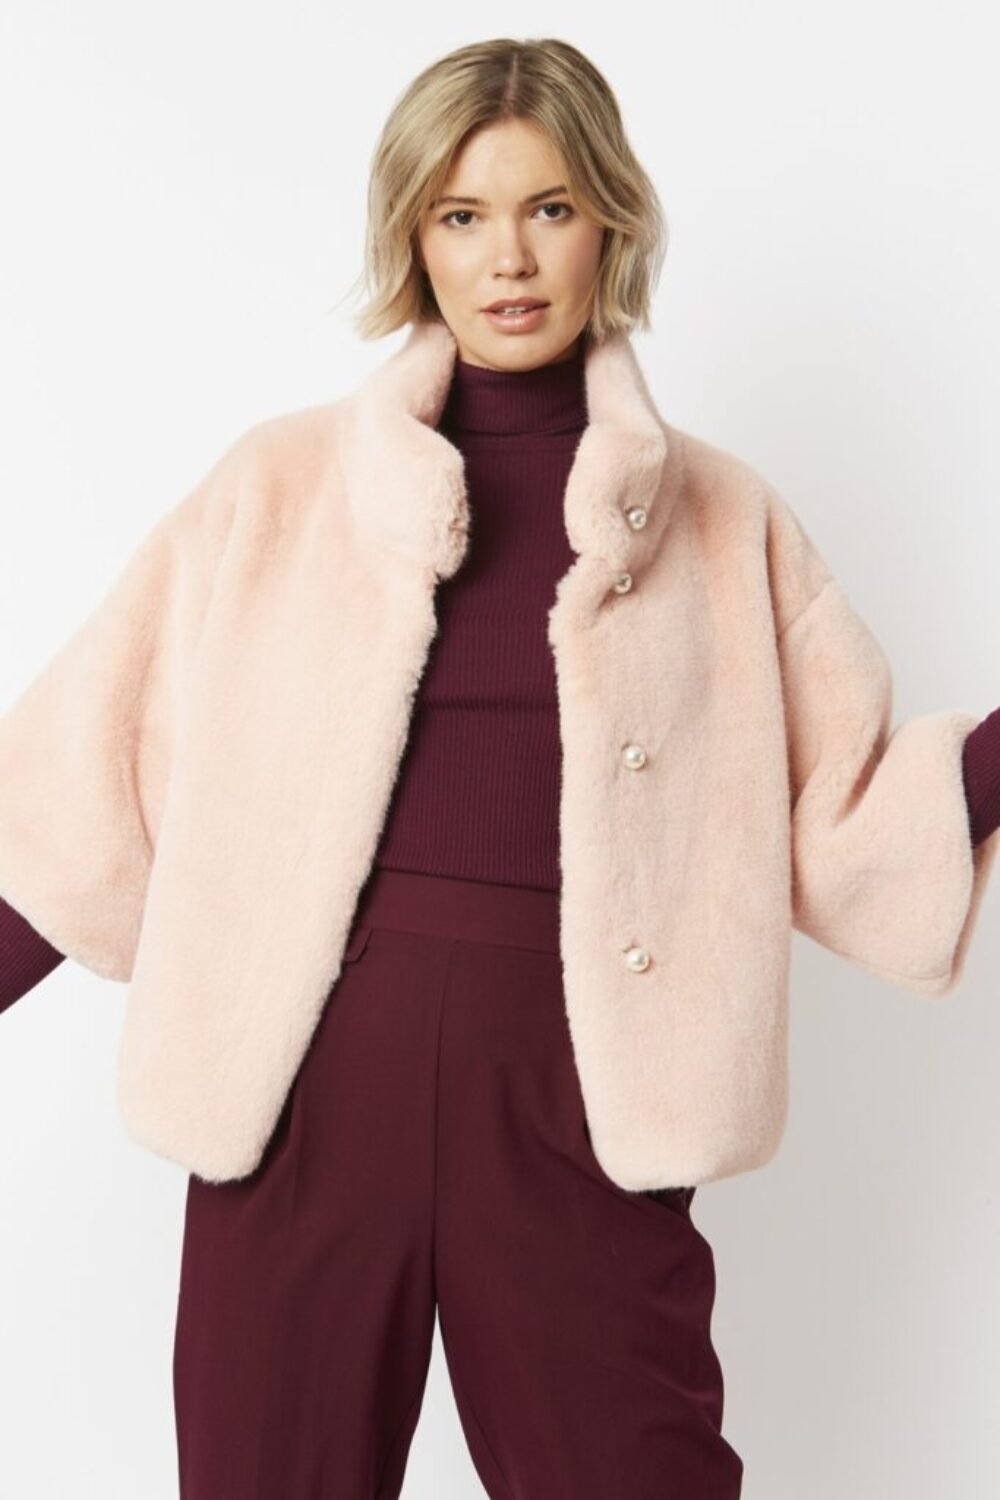 Shop Lux Pink Faux Fur Jacket With Pearls and women's luxury and designer clothes at www.lux-apparel.co.uk